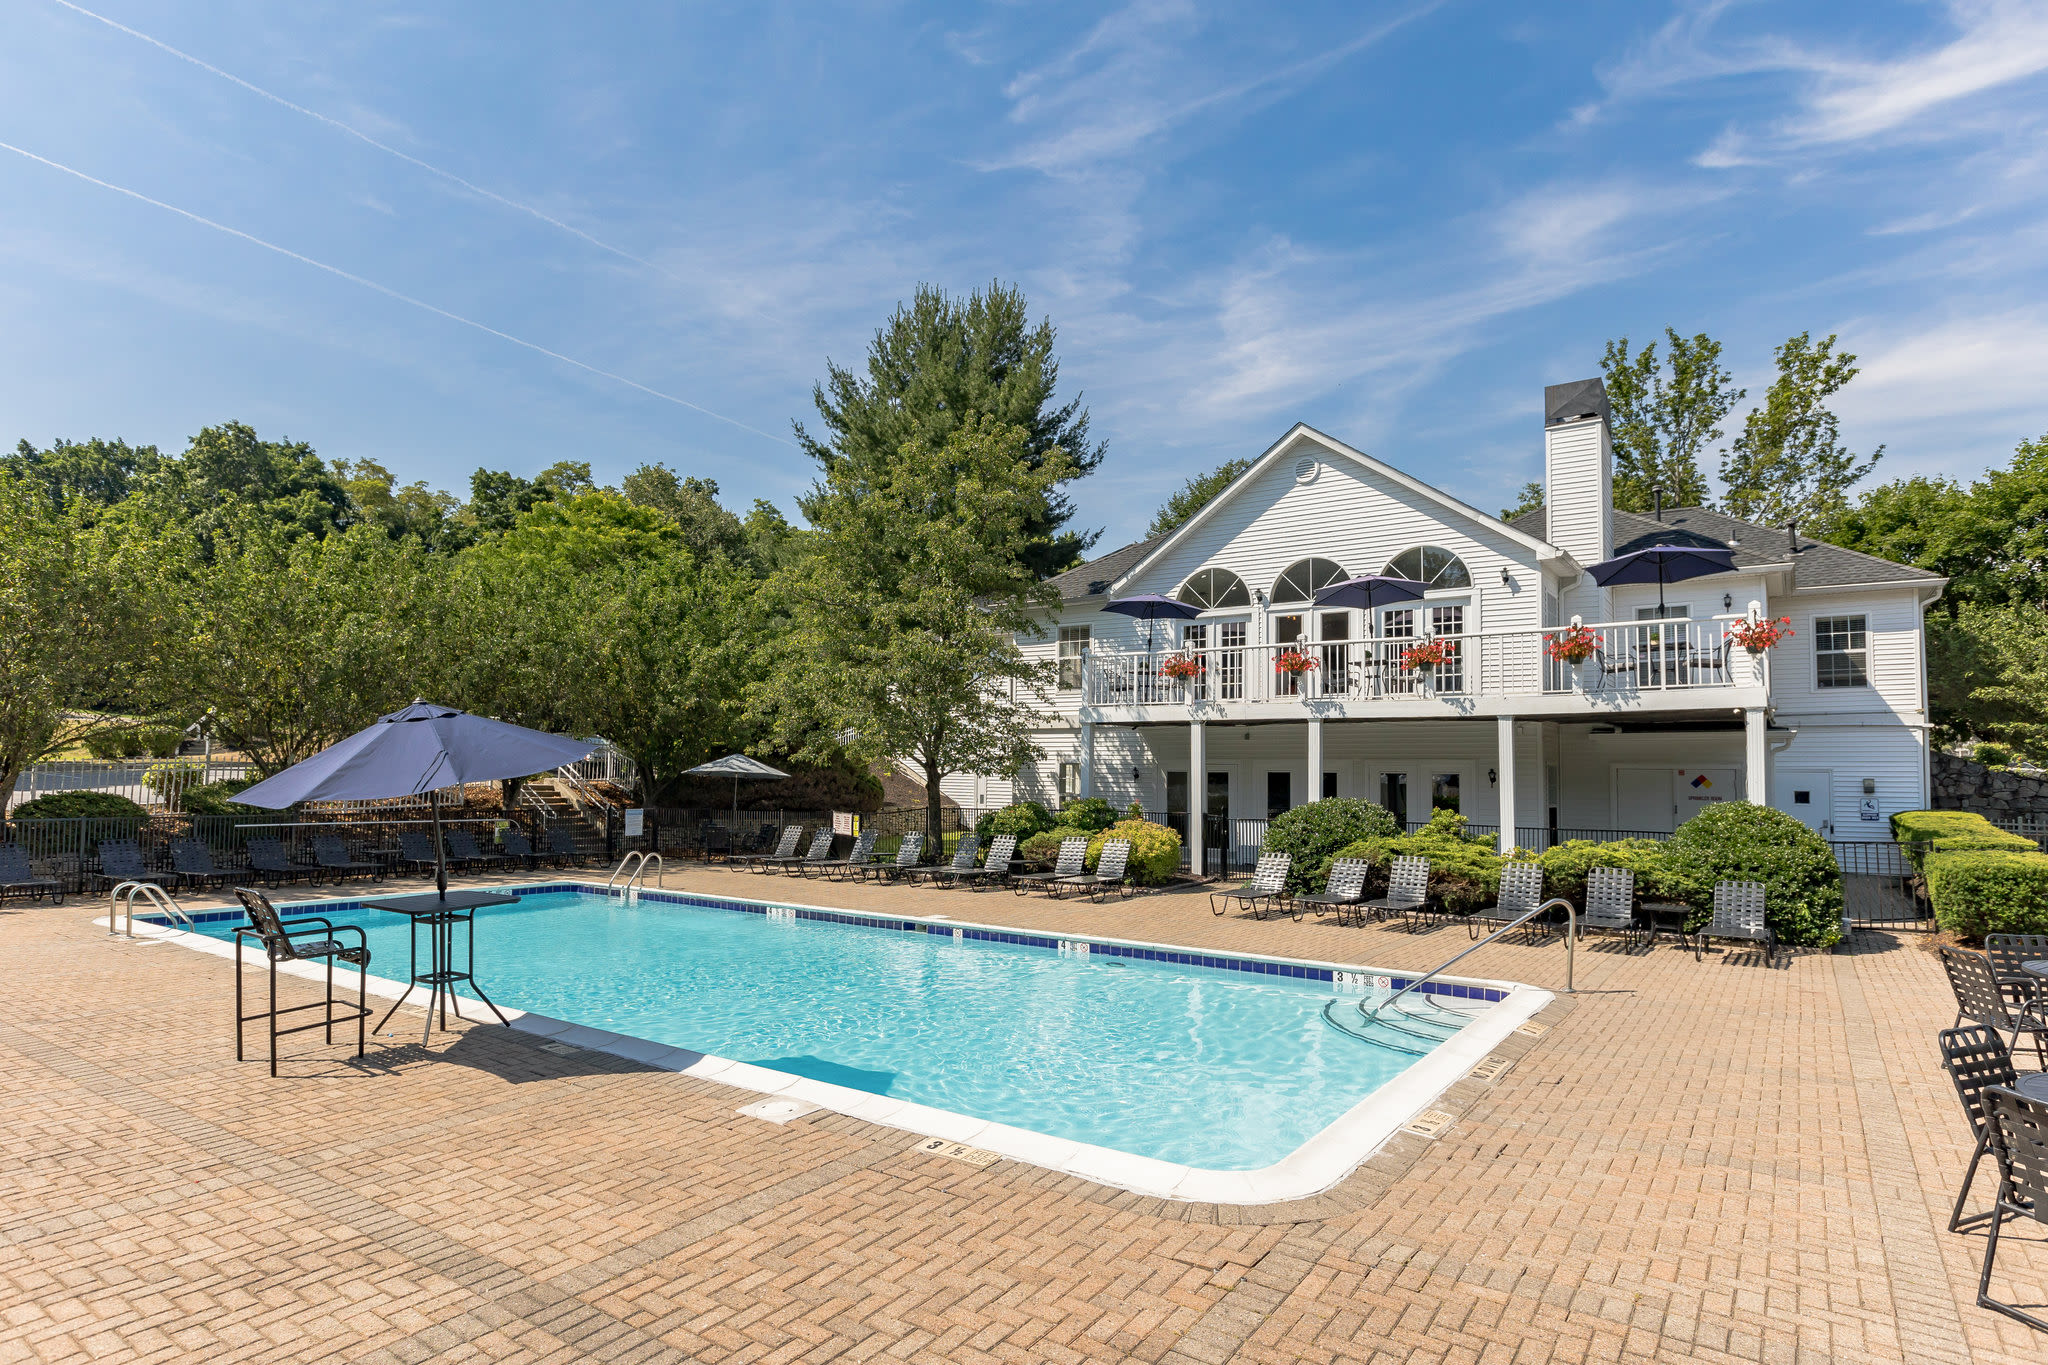 Take a refreshing dip in our swimming pool at Vista Point Apartments' tennis court in Wappingers Falls, New York